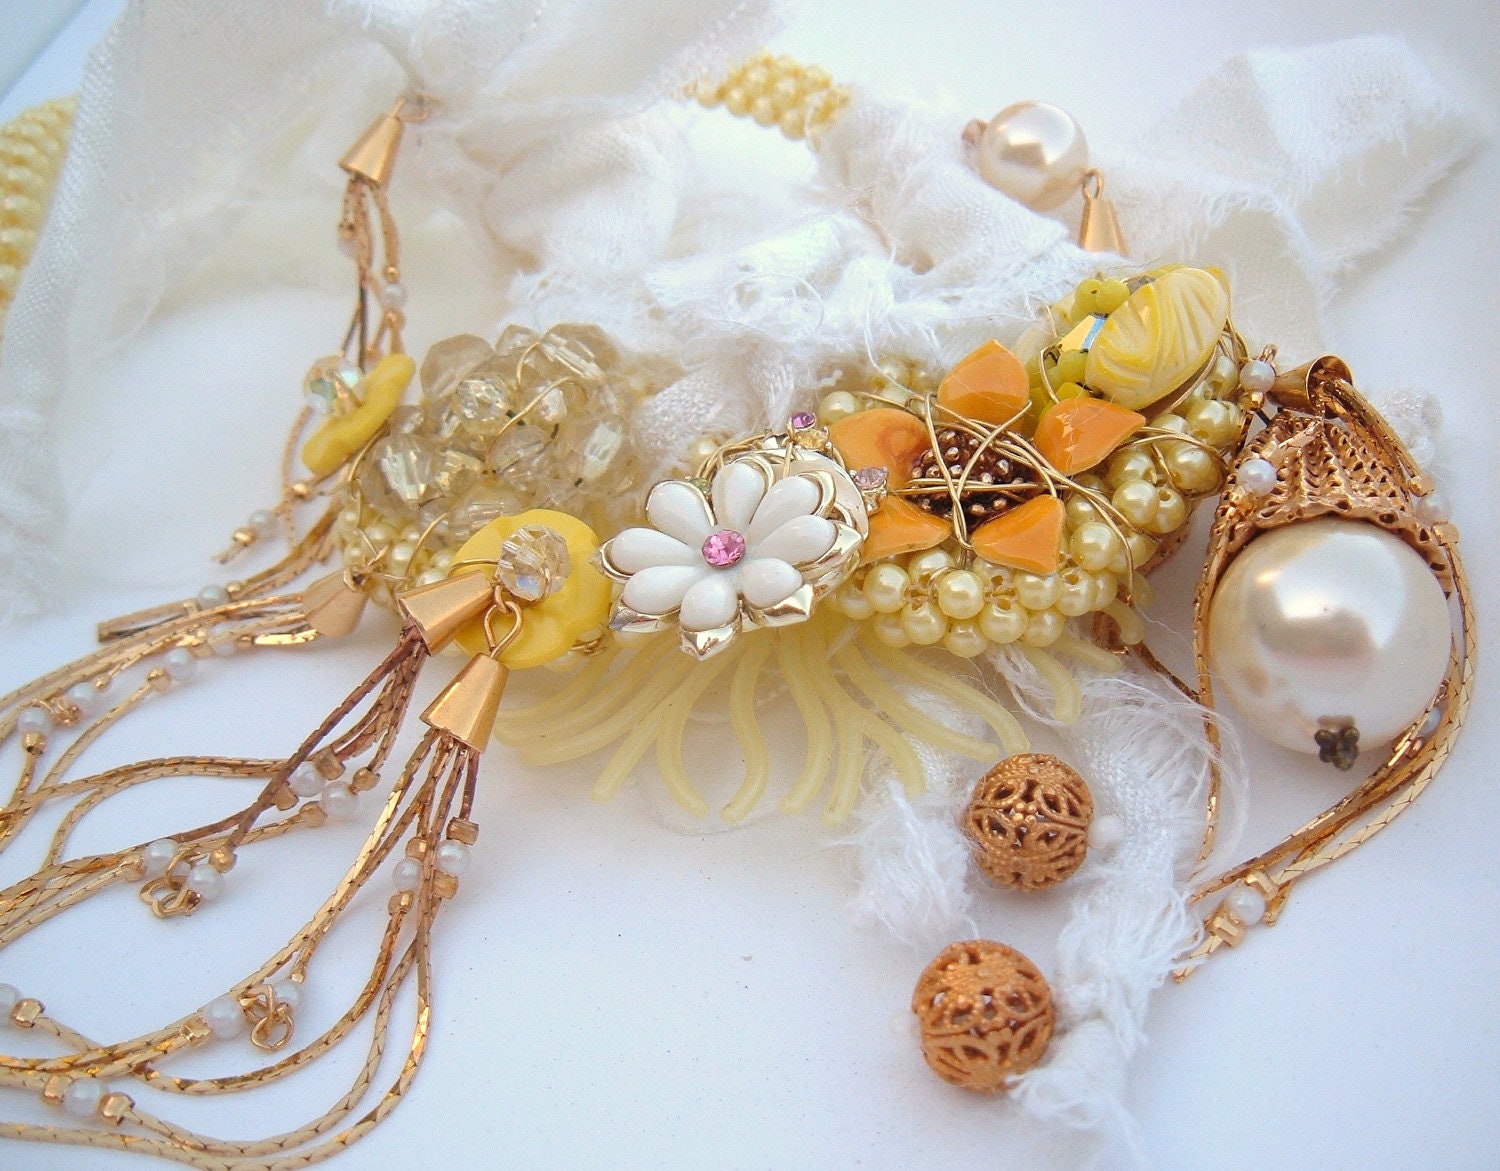 Yellow SheDazie Vintage recycle statement flowers and romance ooak necklace